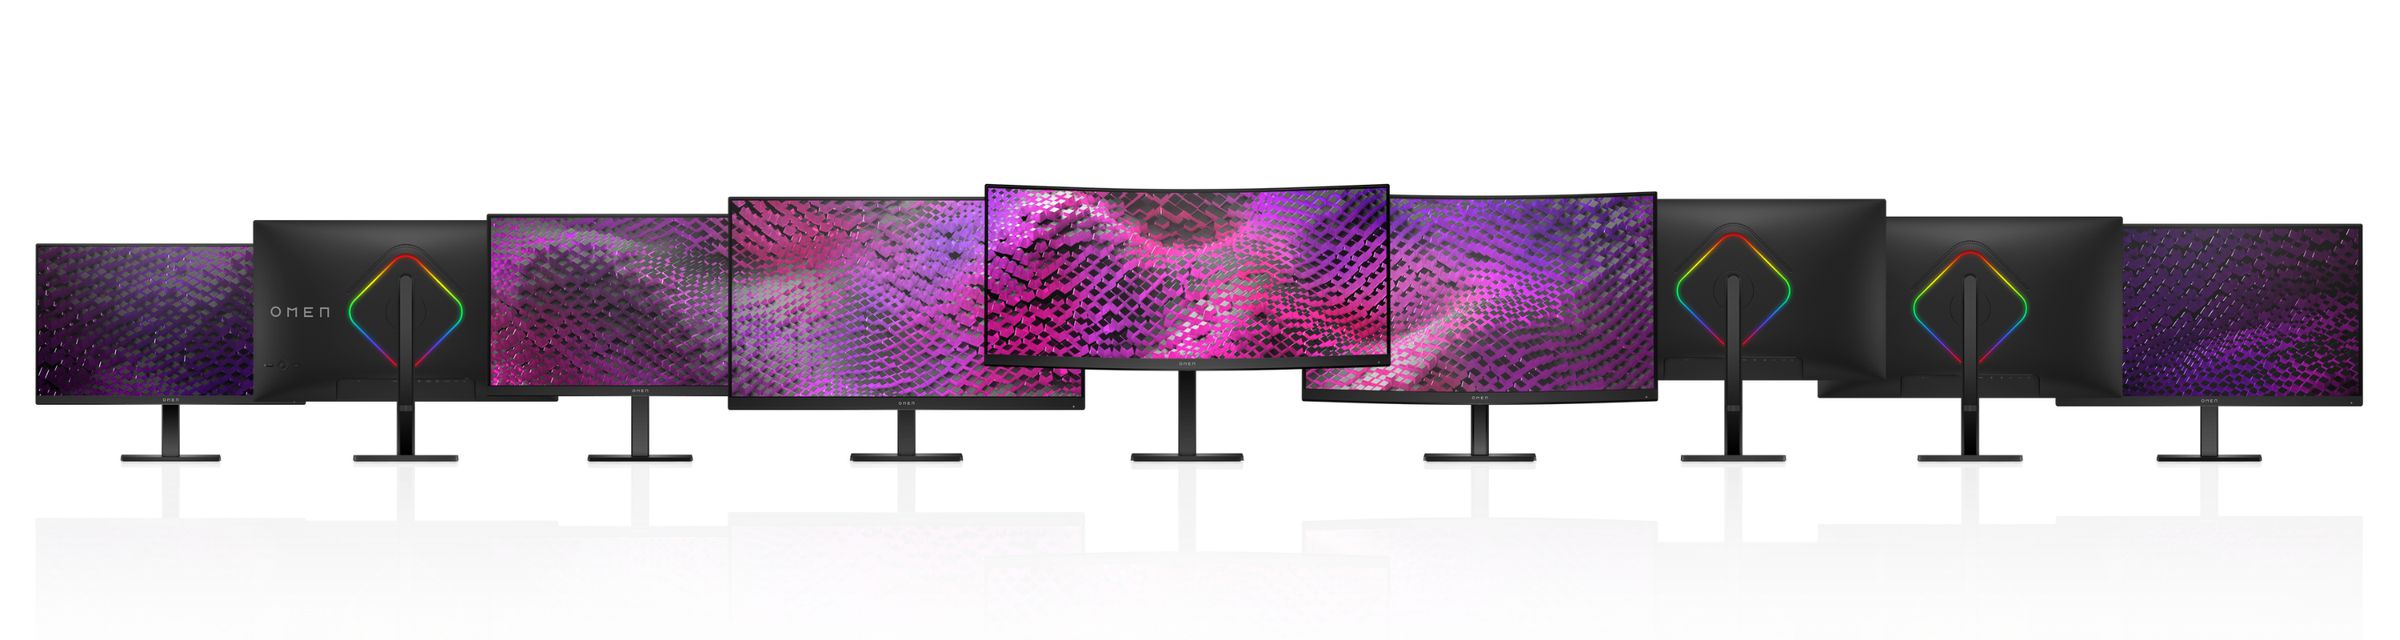 All nine of HP’s new Omen gaming monitors announced in March 2023. The monitors are lined up against a white backdrop.